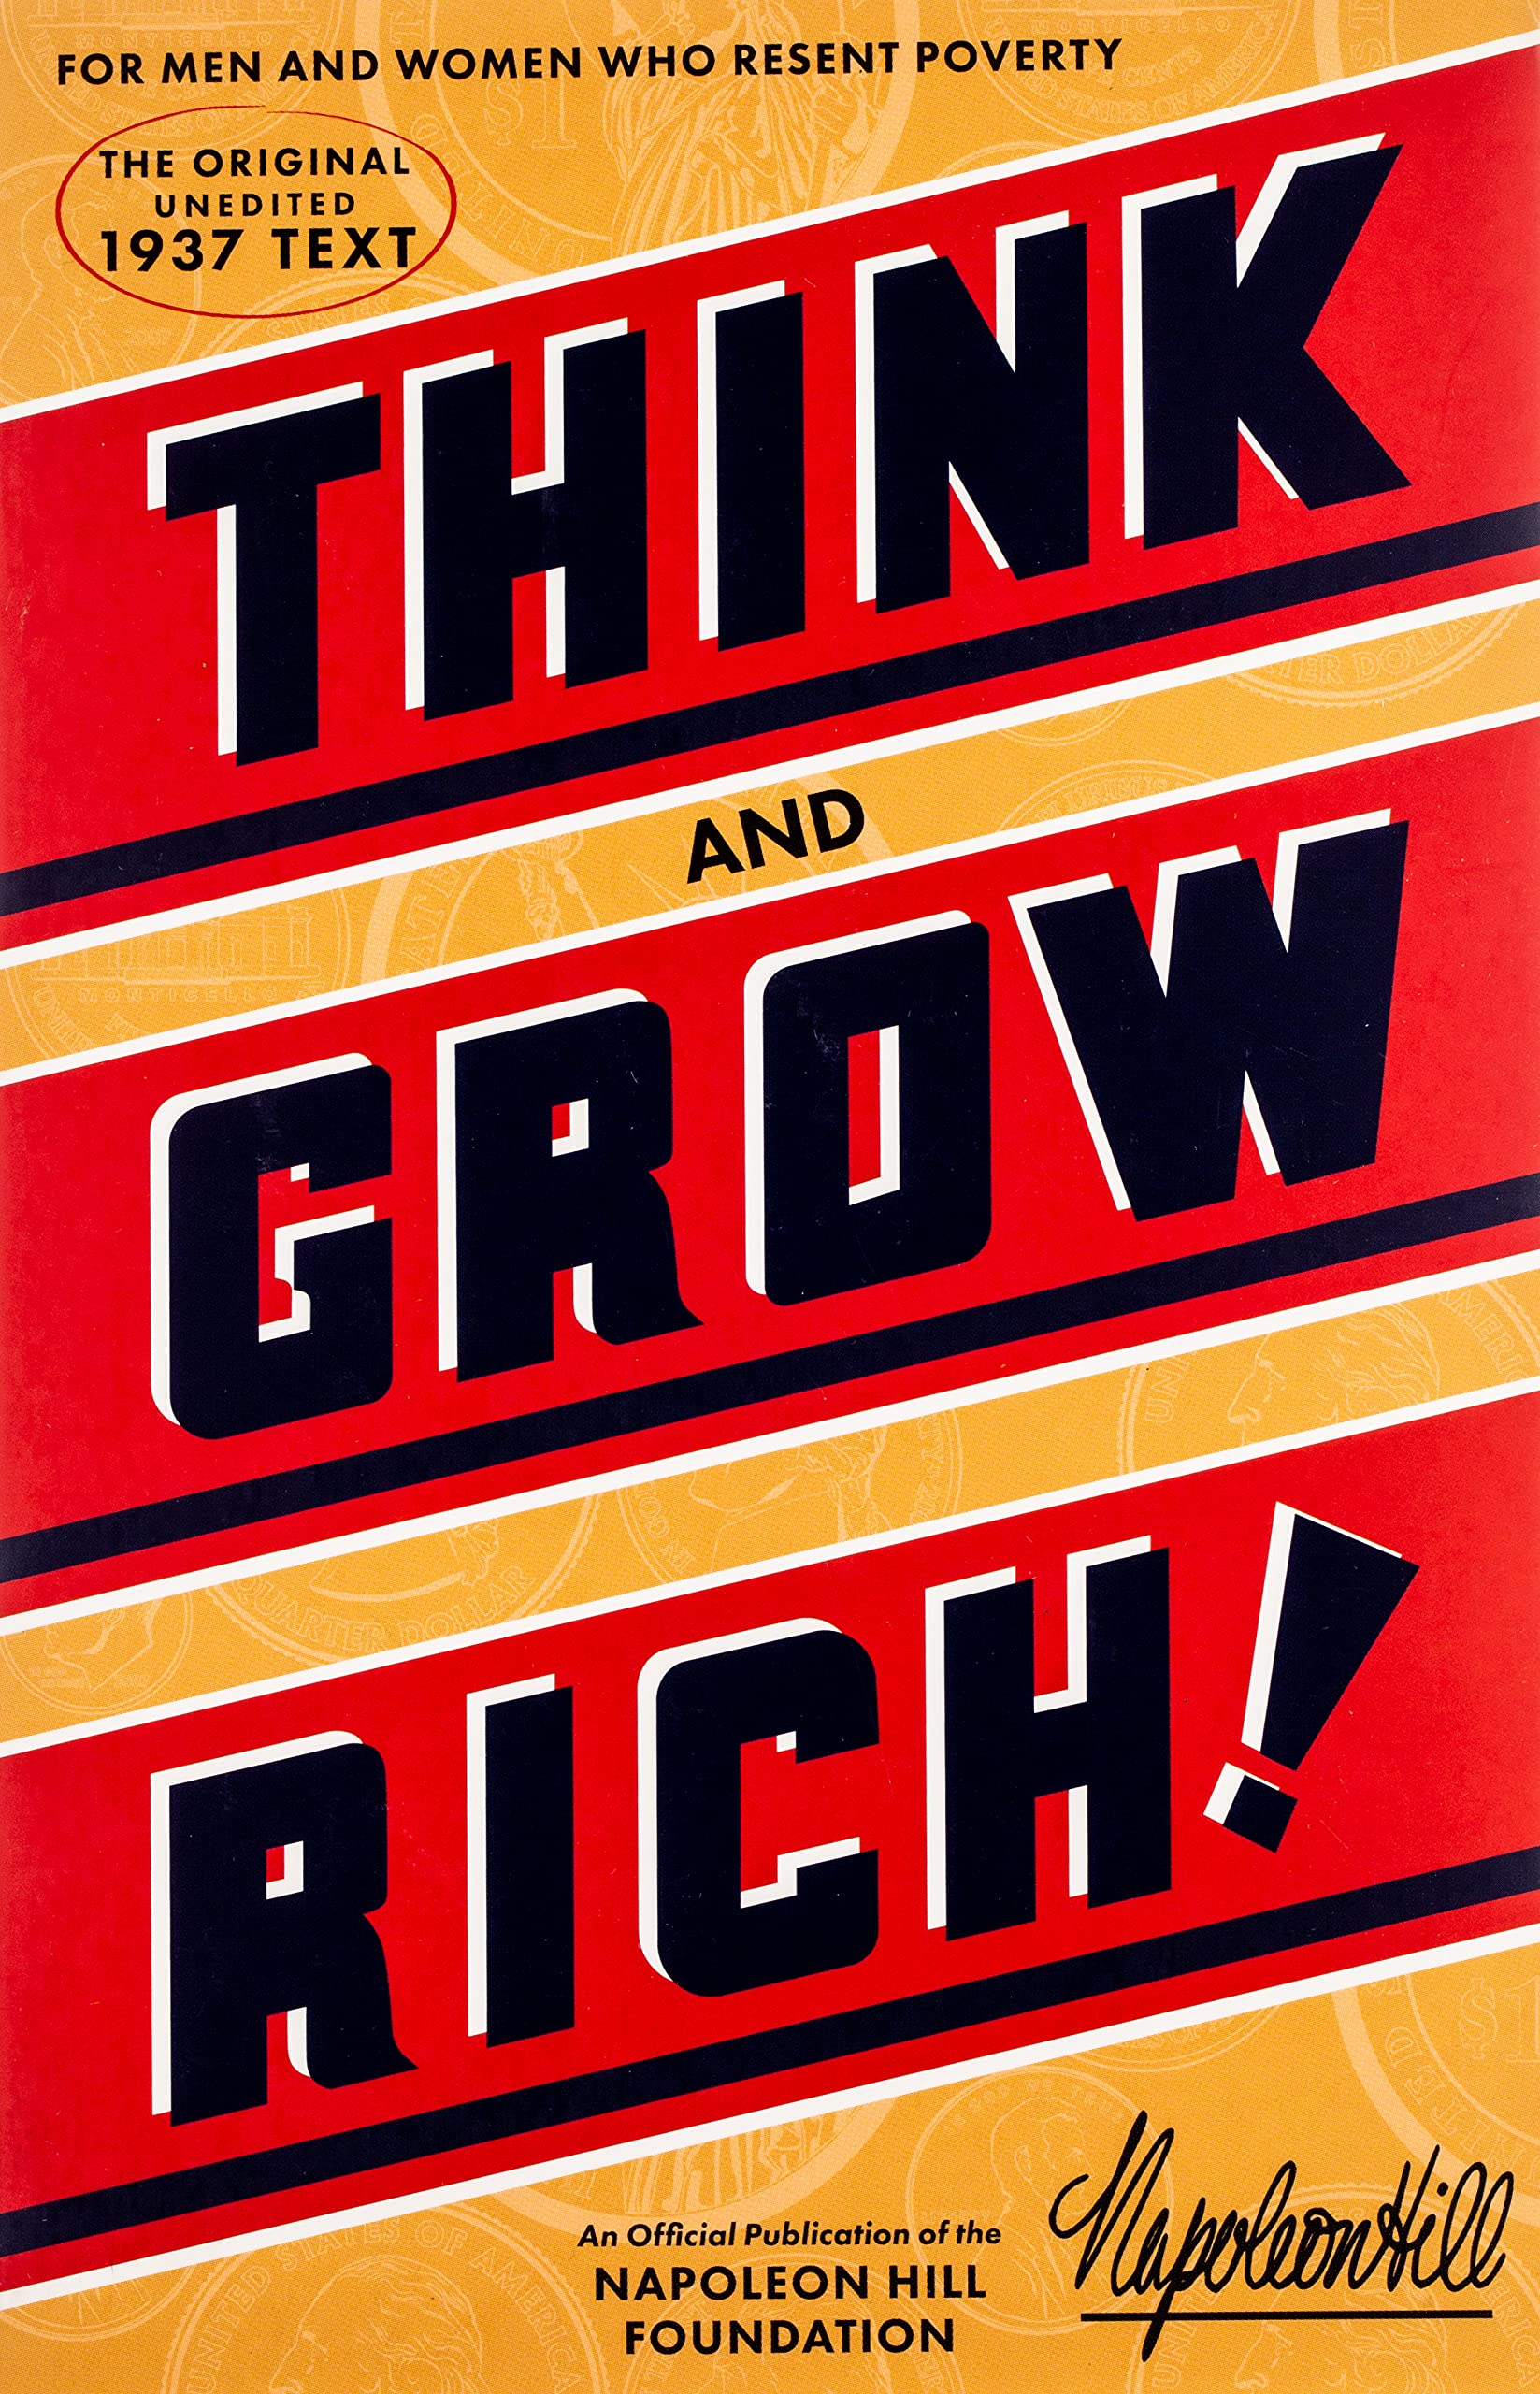 Think And Grow Rich by Napoleon Hill - For men and women who resent poverty